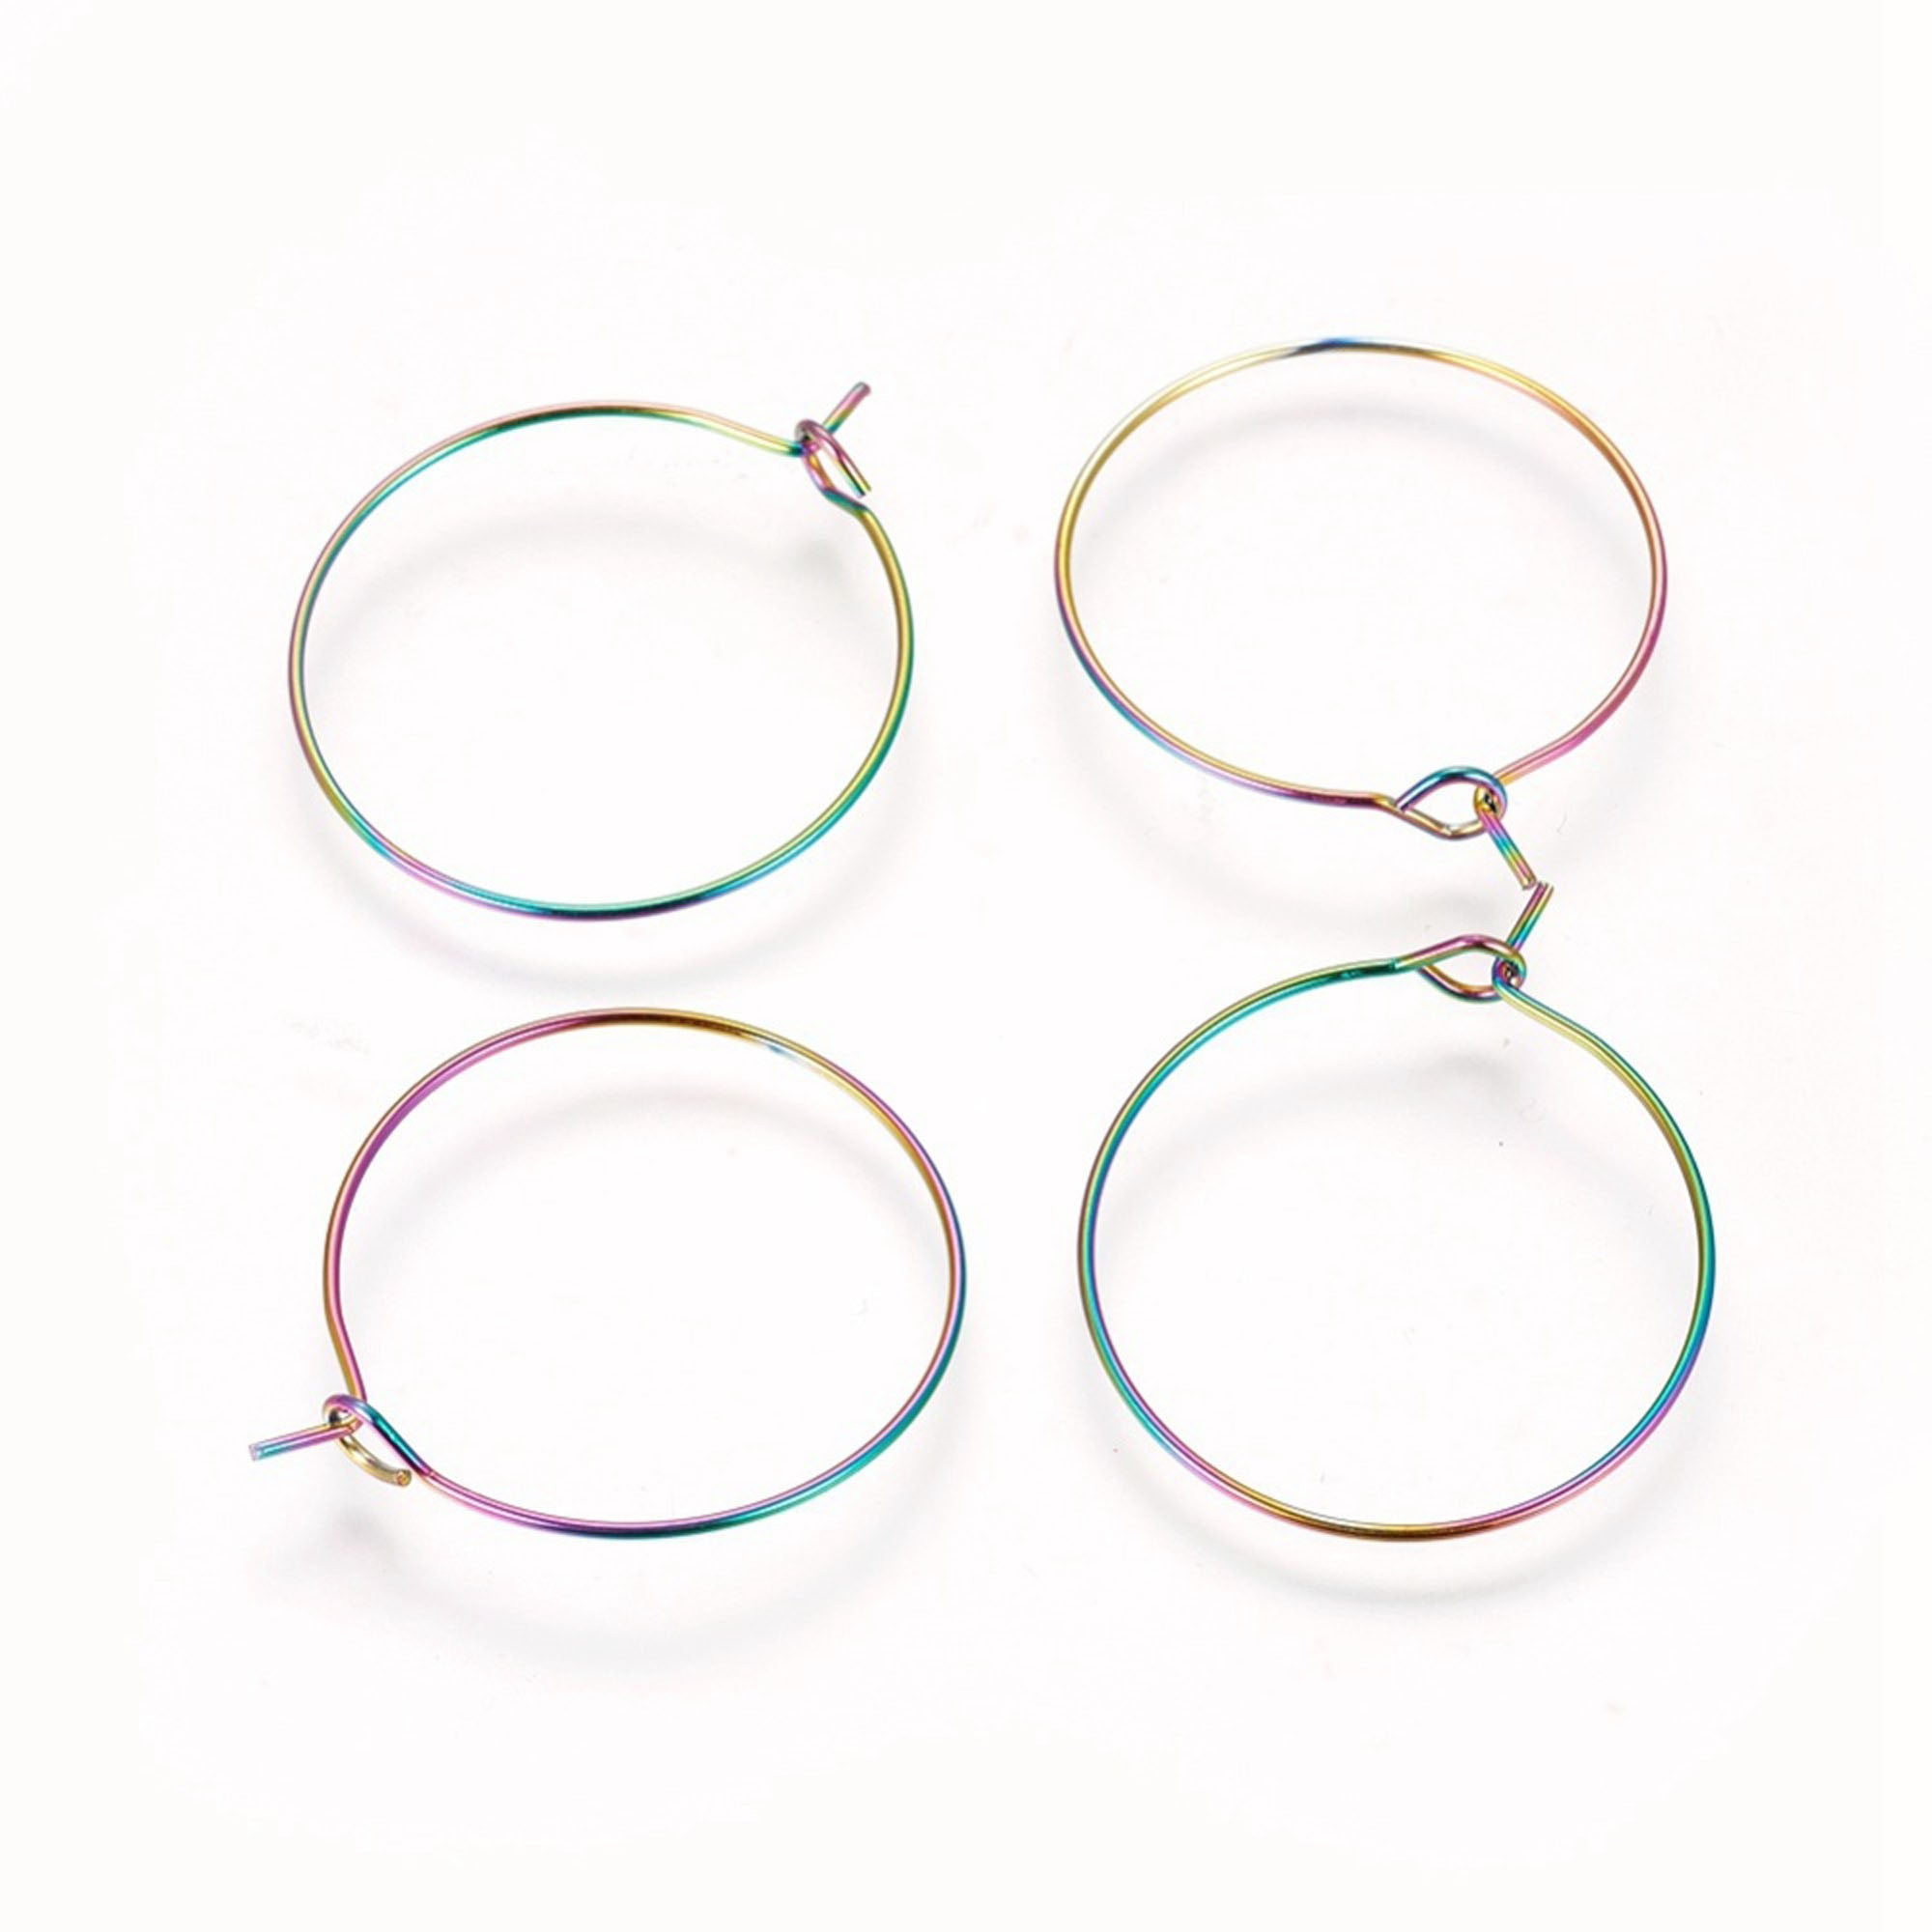 UNICRAFTALE About 100pcs 30mm Wine Glass Charm Rings Open Beading Hoop  Stainless Steel Hoop Stainless Steel Color Metal Earring Ring for DIY  Jewelry